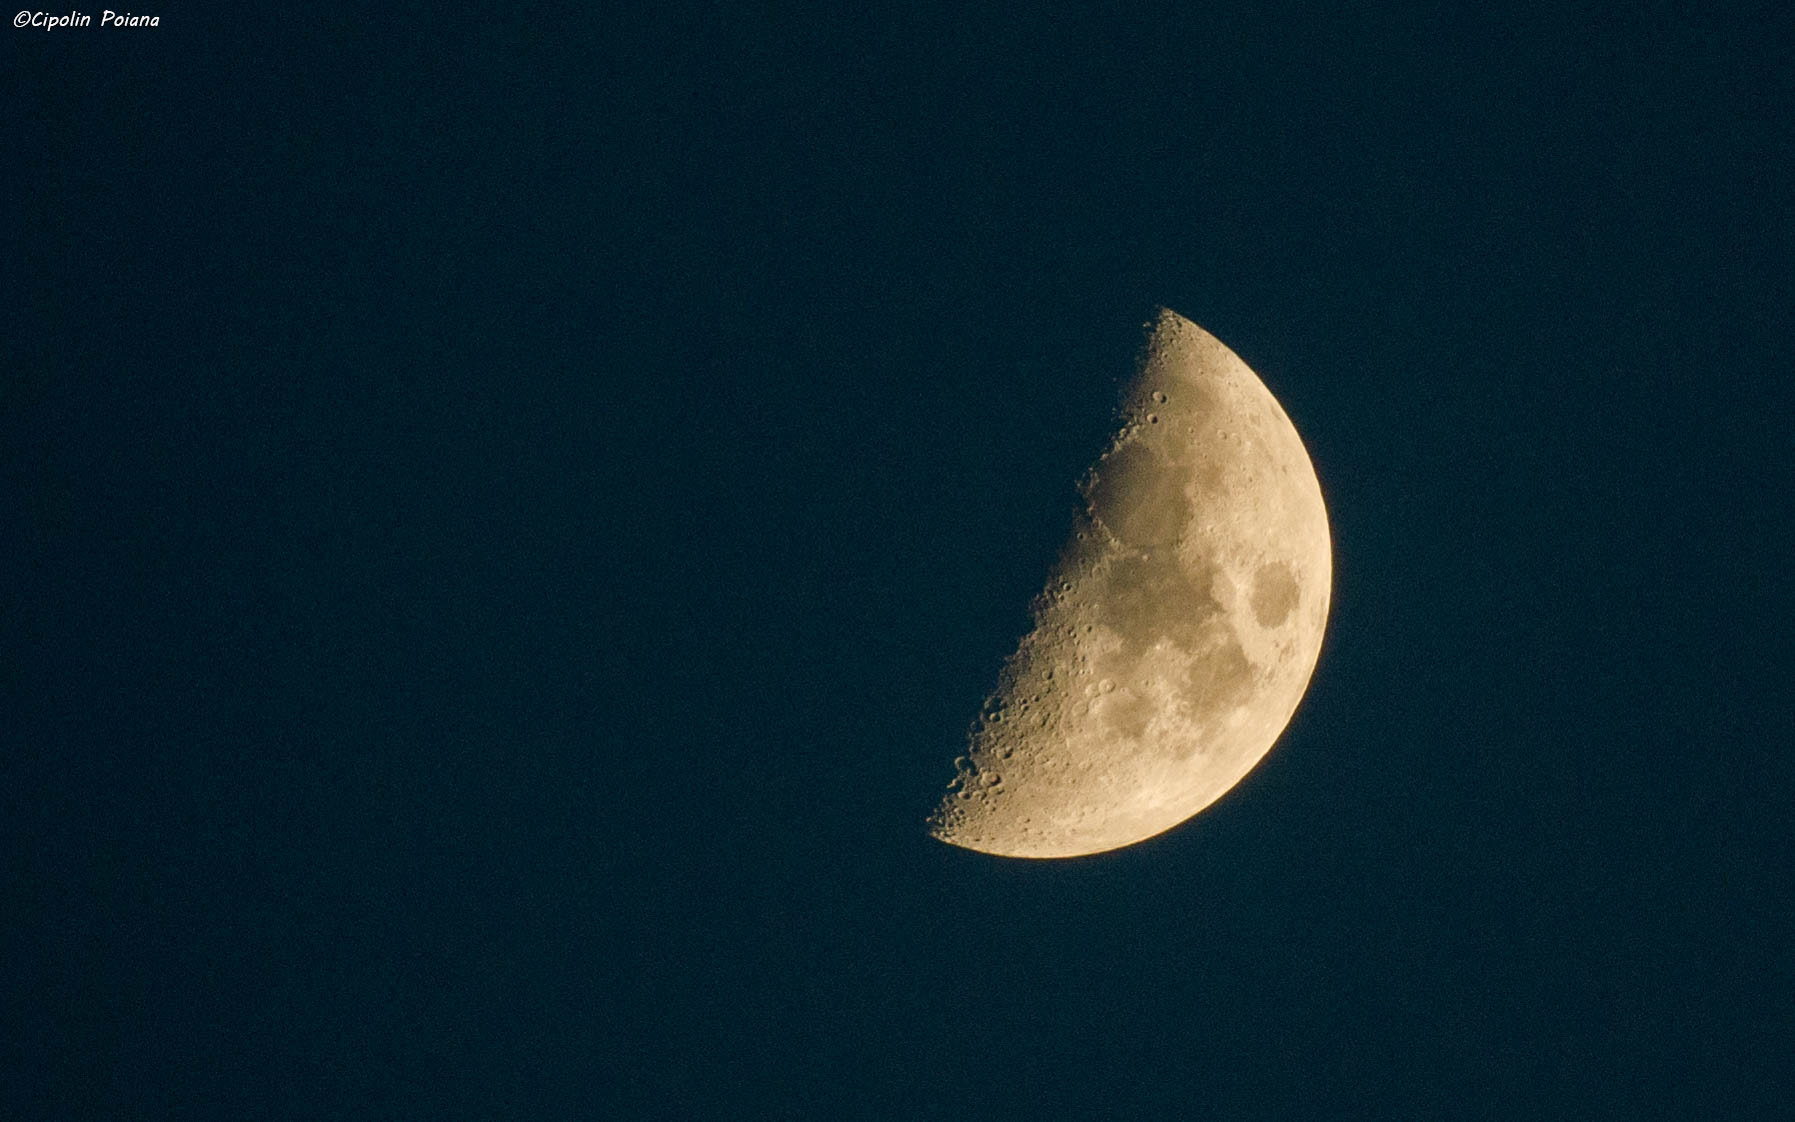 Nikon D7000 + Tamron SP 70-300mm F4-5.6 Di VC USD sample photo. Moon in this evening photography